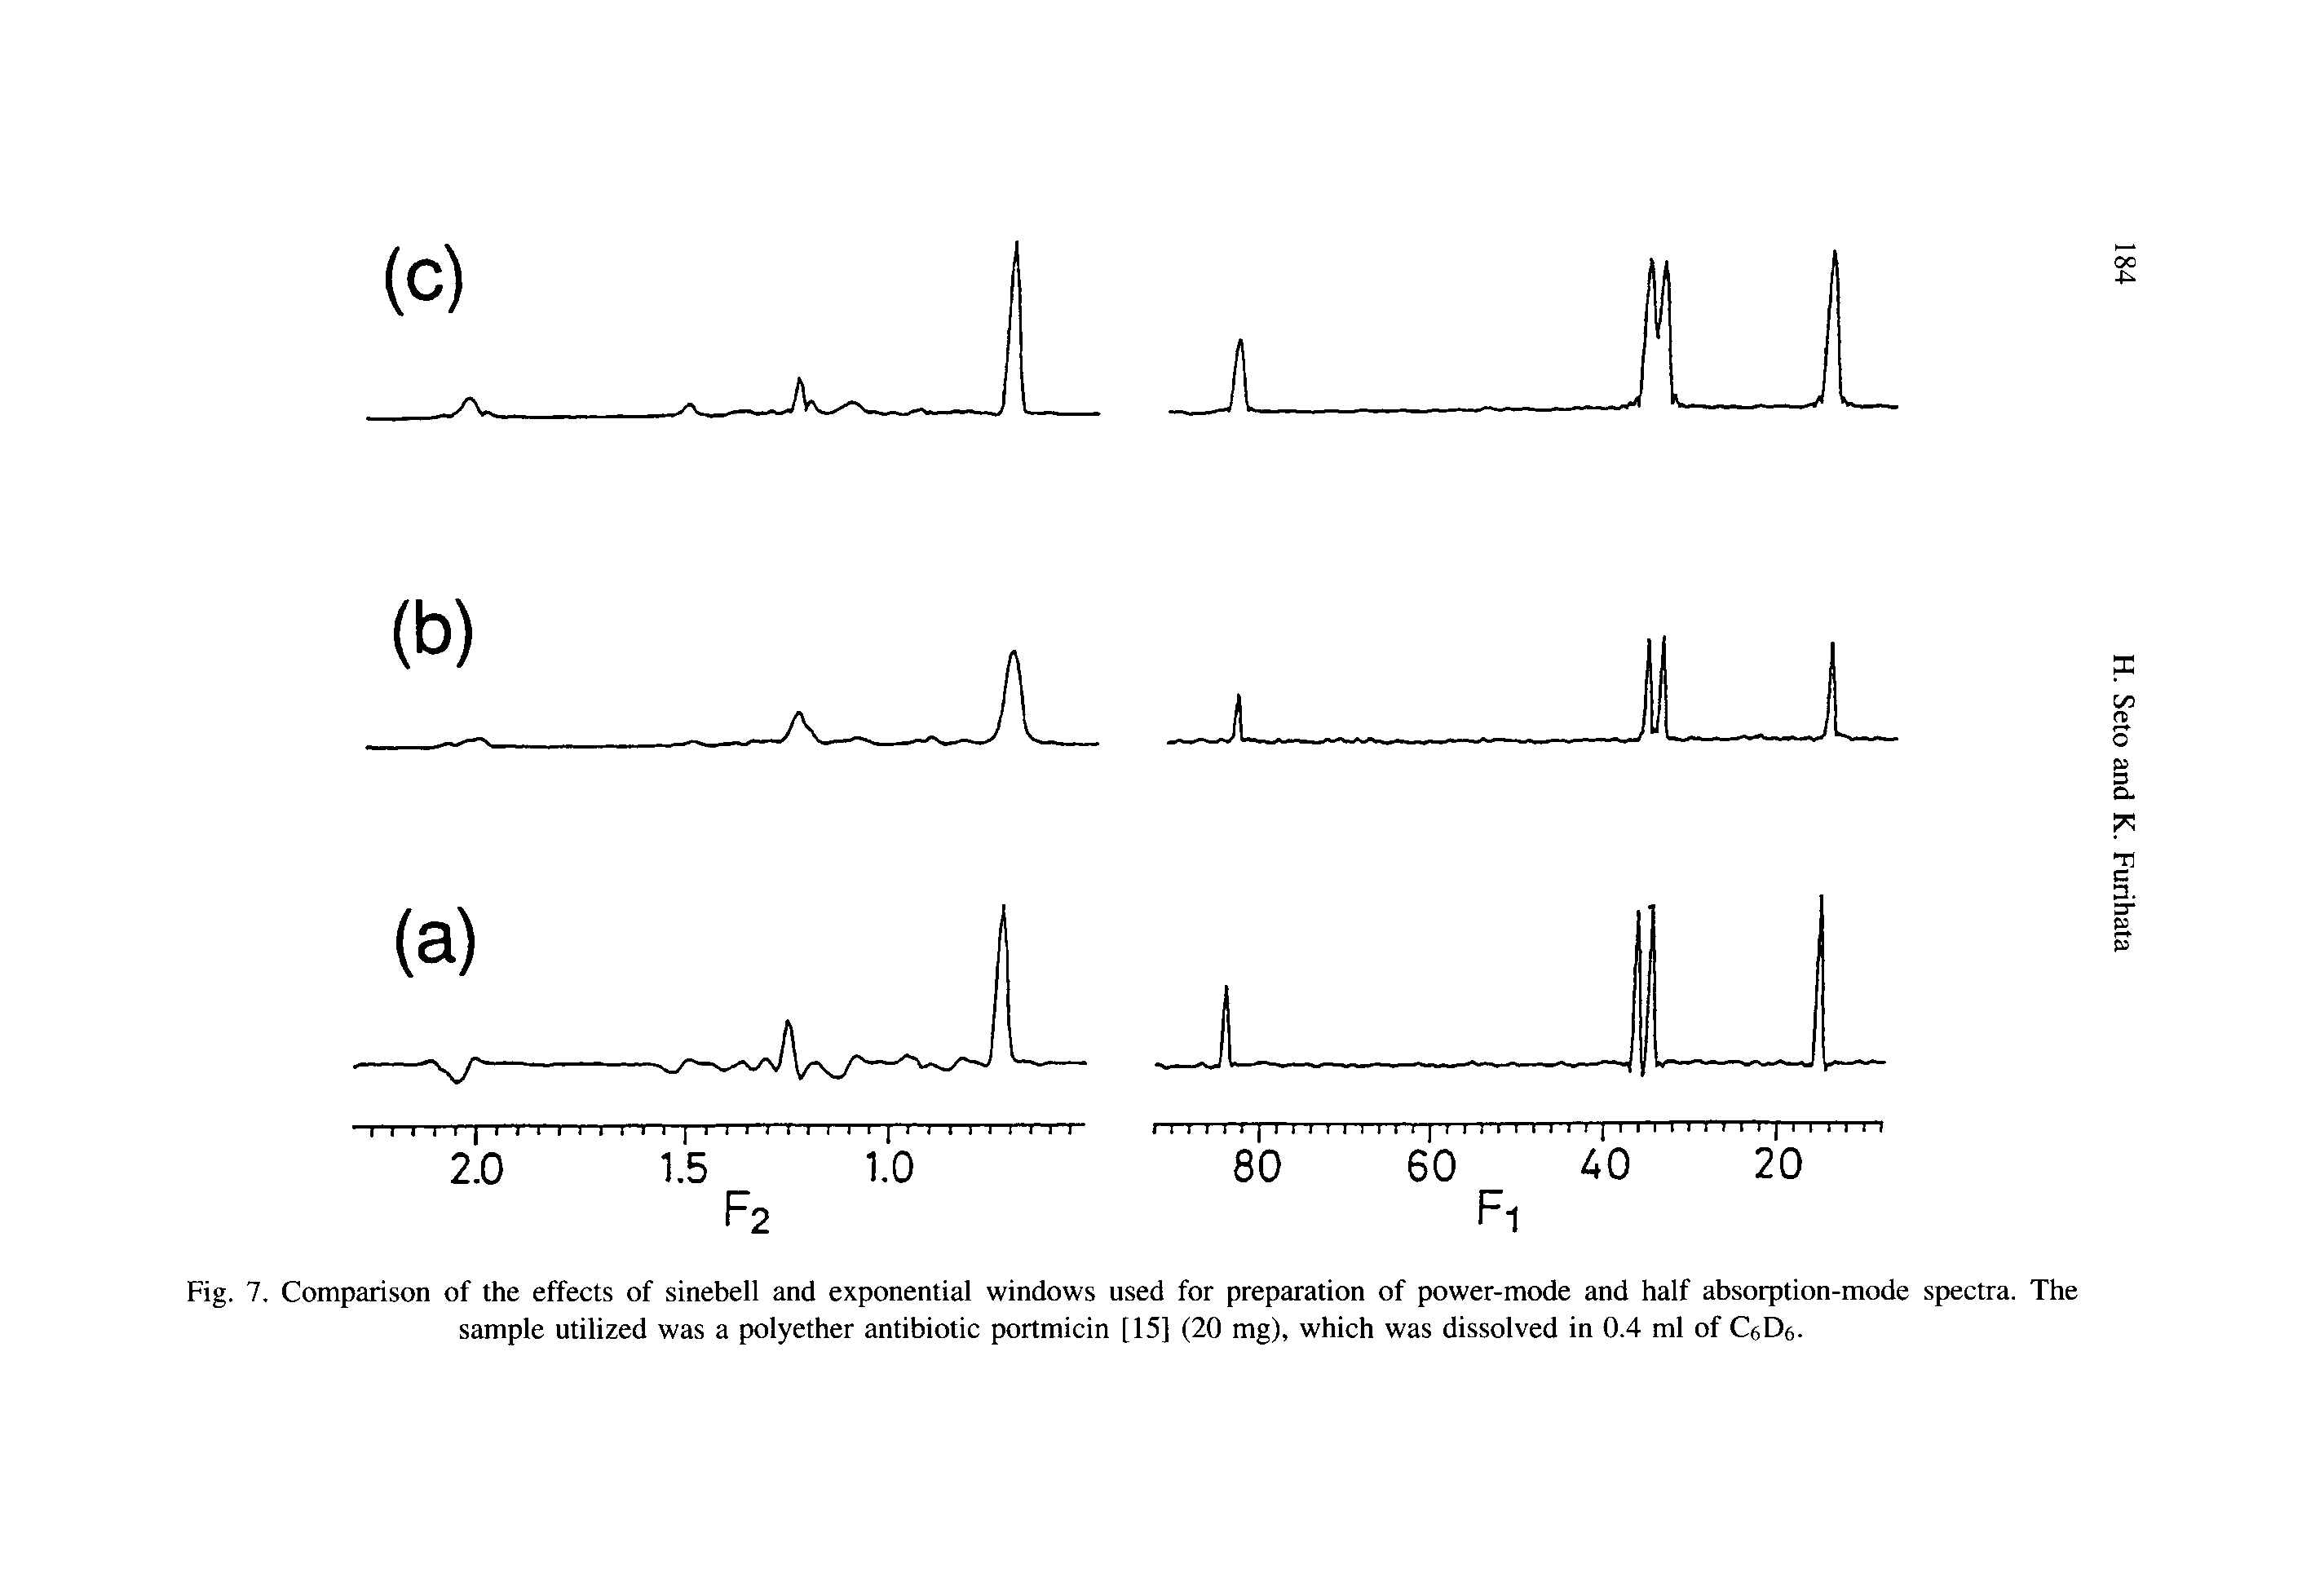 Fig. 7. Comparison of the effects of sinebell and exponential windows used for preparation of power-mode and half absorption-mode spectra. The sample utilized was a polyether antibiotic portmicin [15] (20 mg), which was dissolved in 0.4 ml of CeDa.